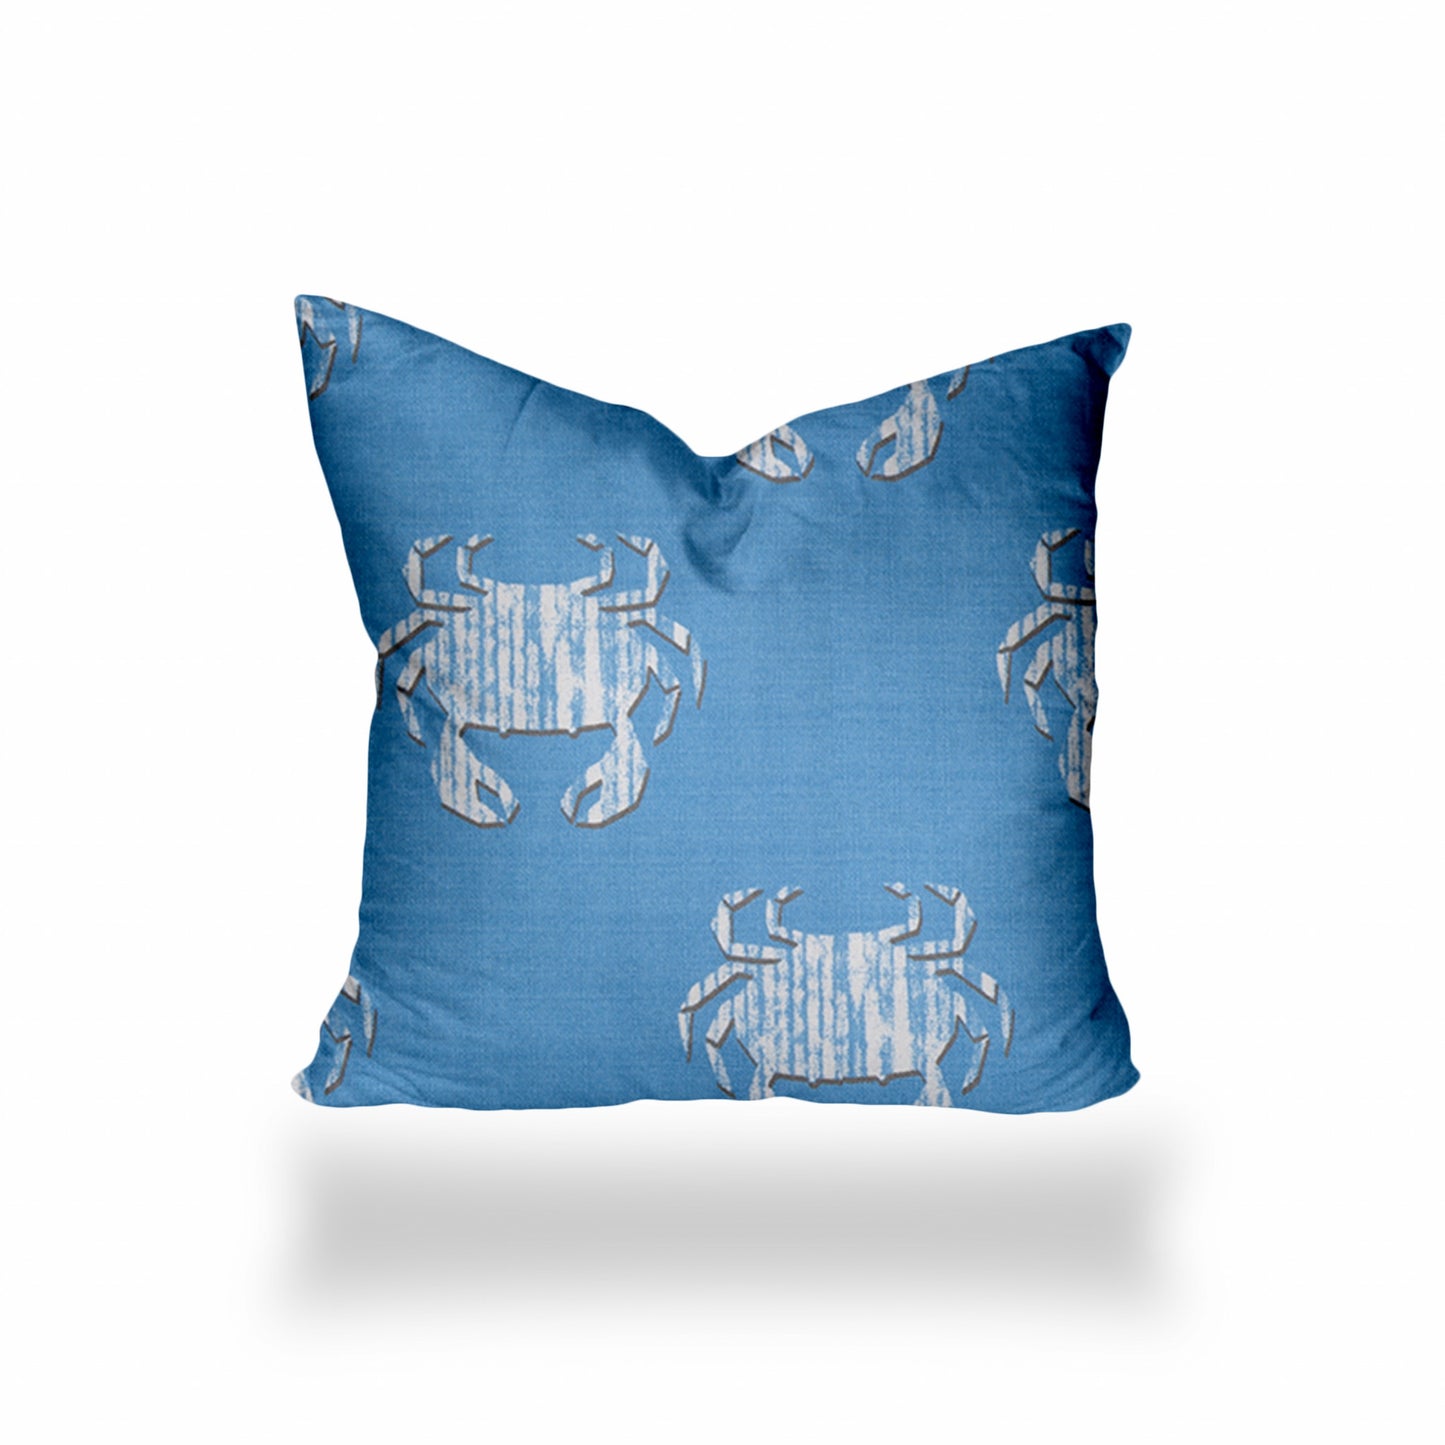 17" X 17" Blue And White Crab Zippered Coastal Throw Indoor Outdoor Pillow